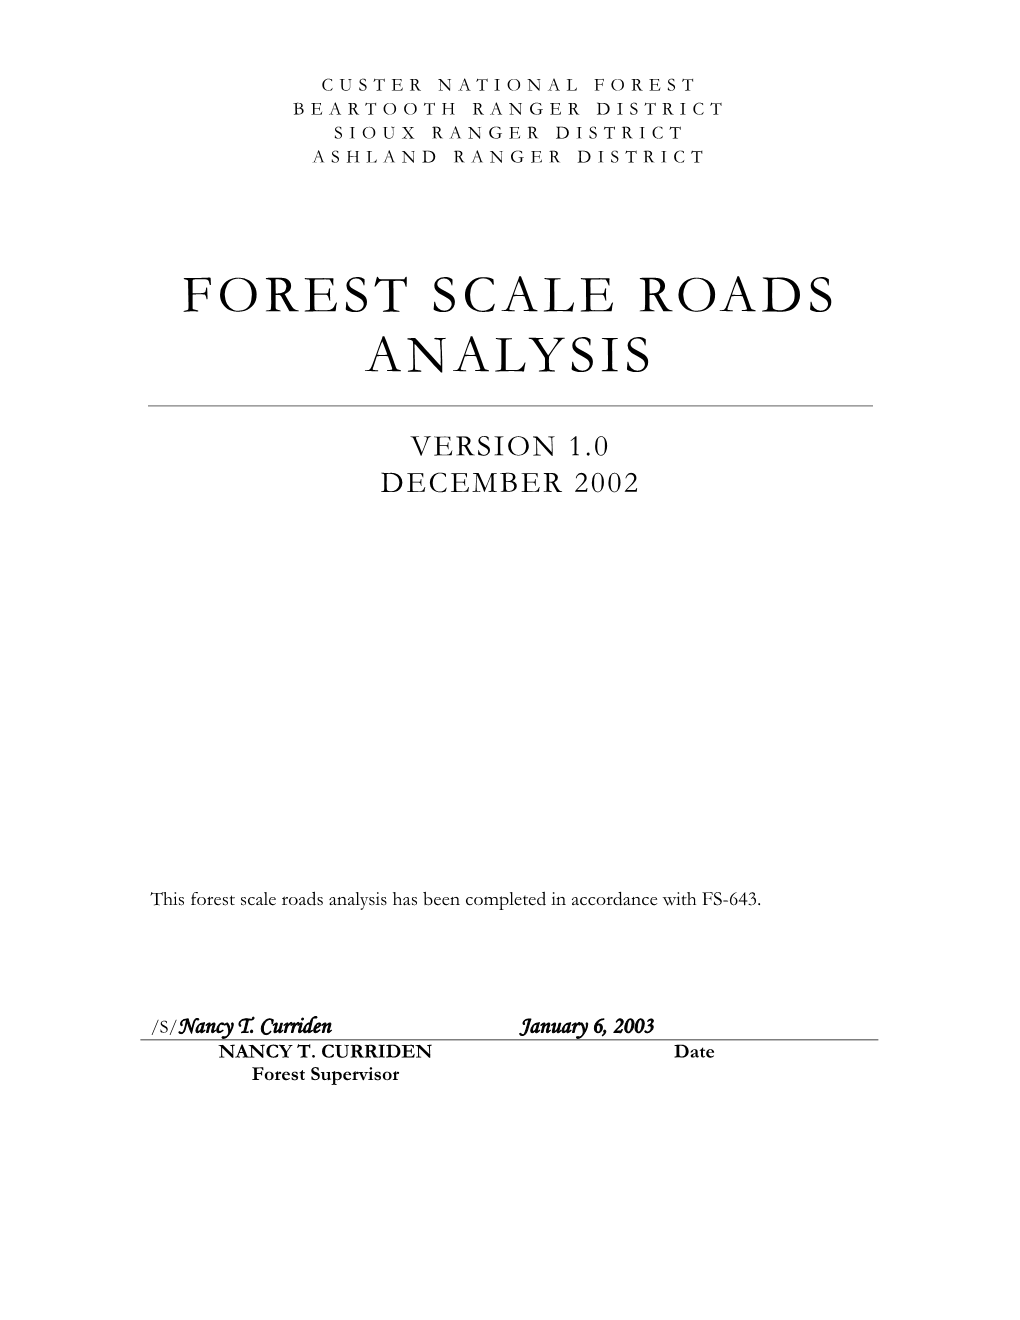 Forest-Wide Roads Analysis